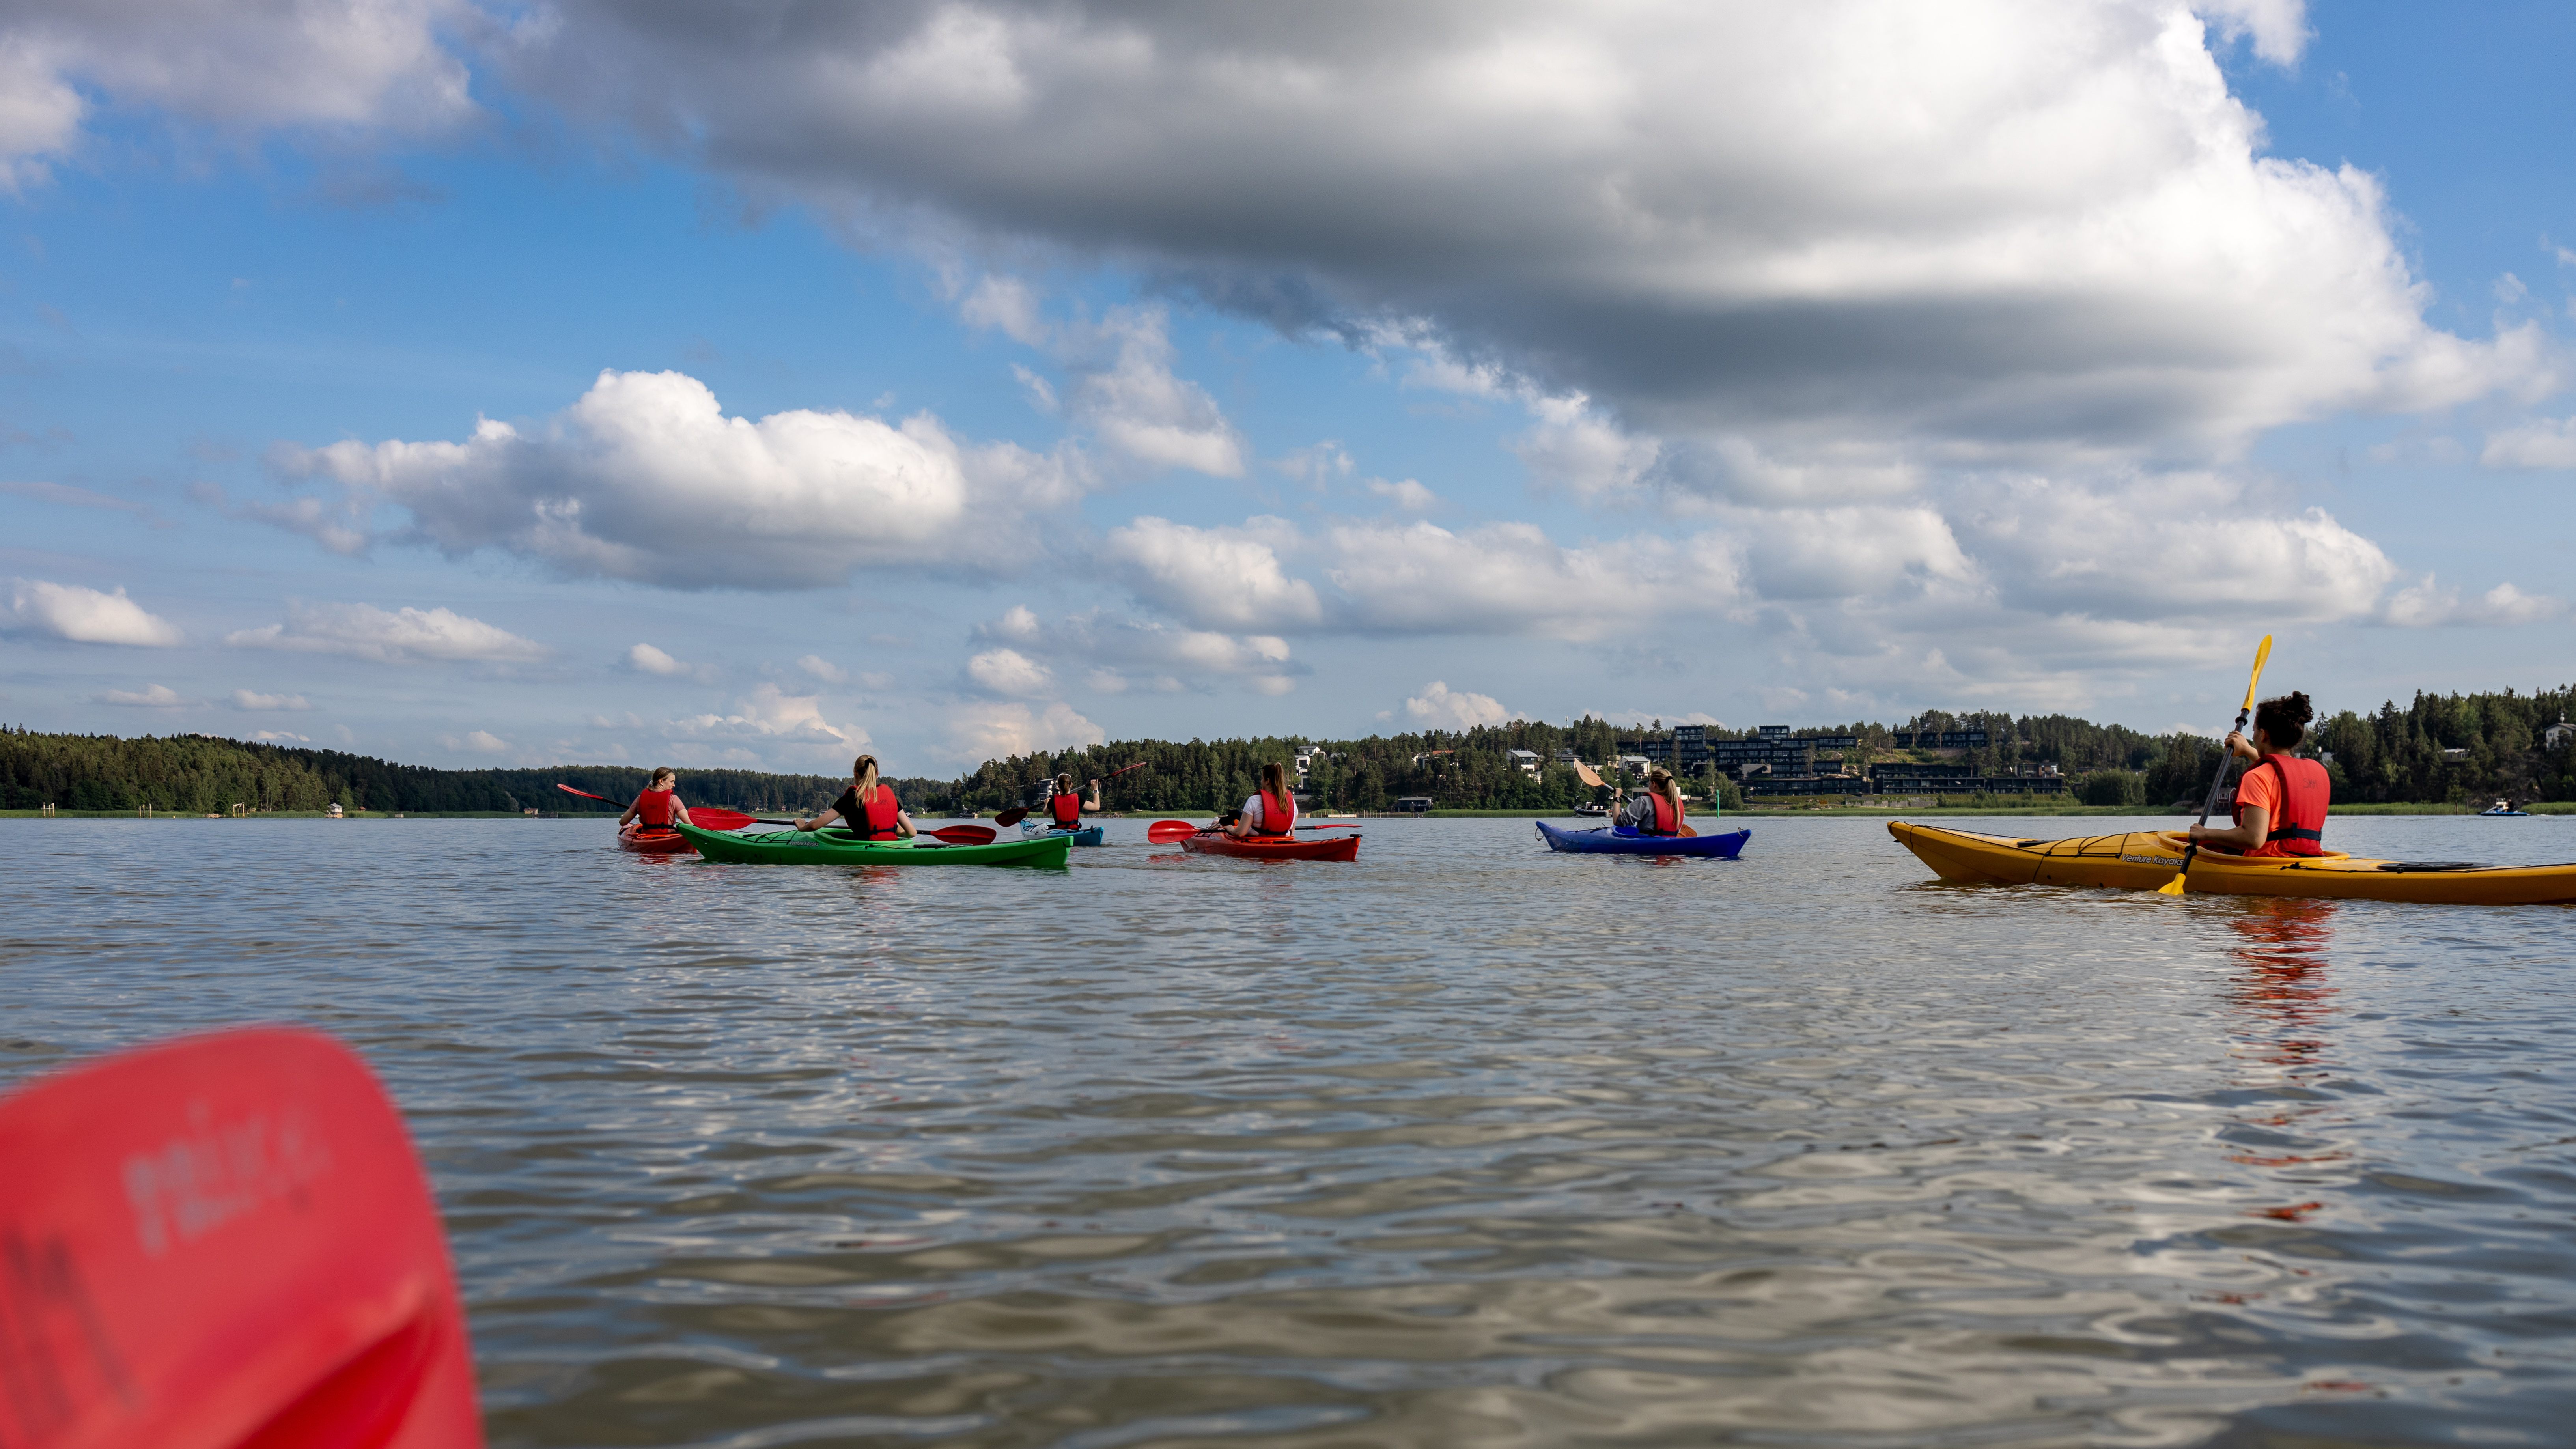 The picture of Aboa’s team members kayaking.